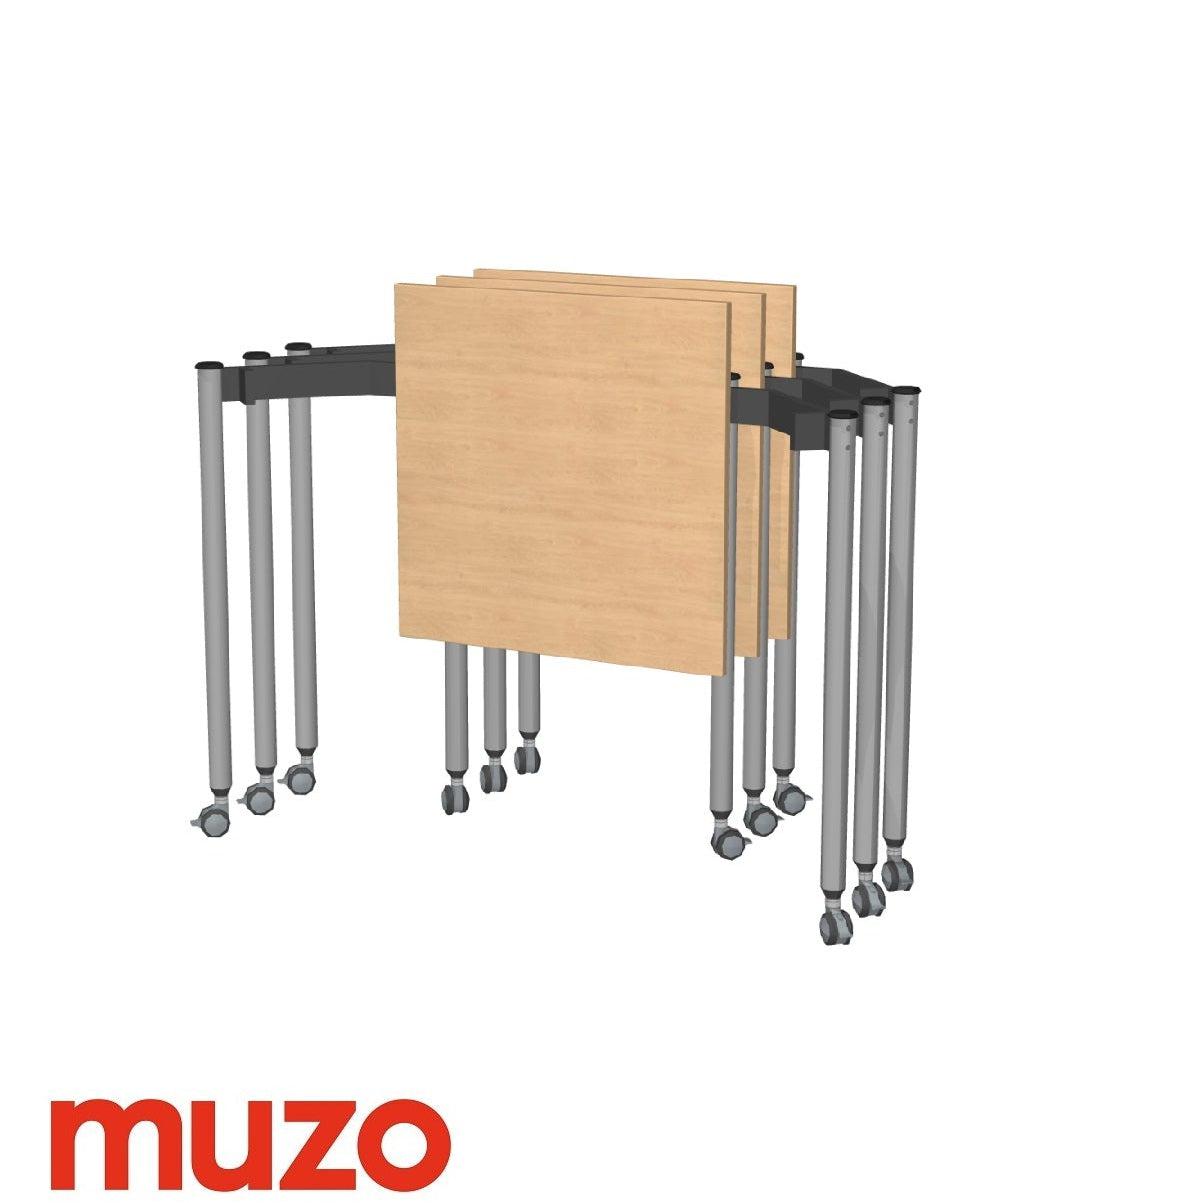 Muzo Tall Kite® Standing Height Mobile Flip-Top Folding/Nesting Table, Small Rectangle, 29.5" W x 25.5" D